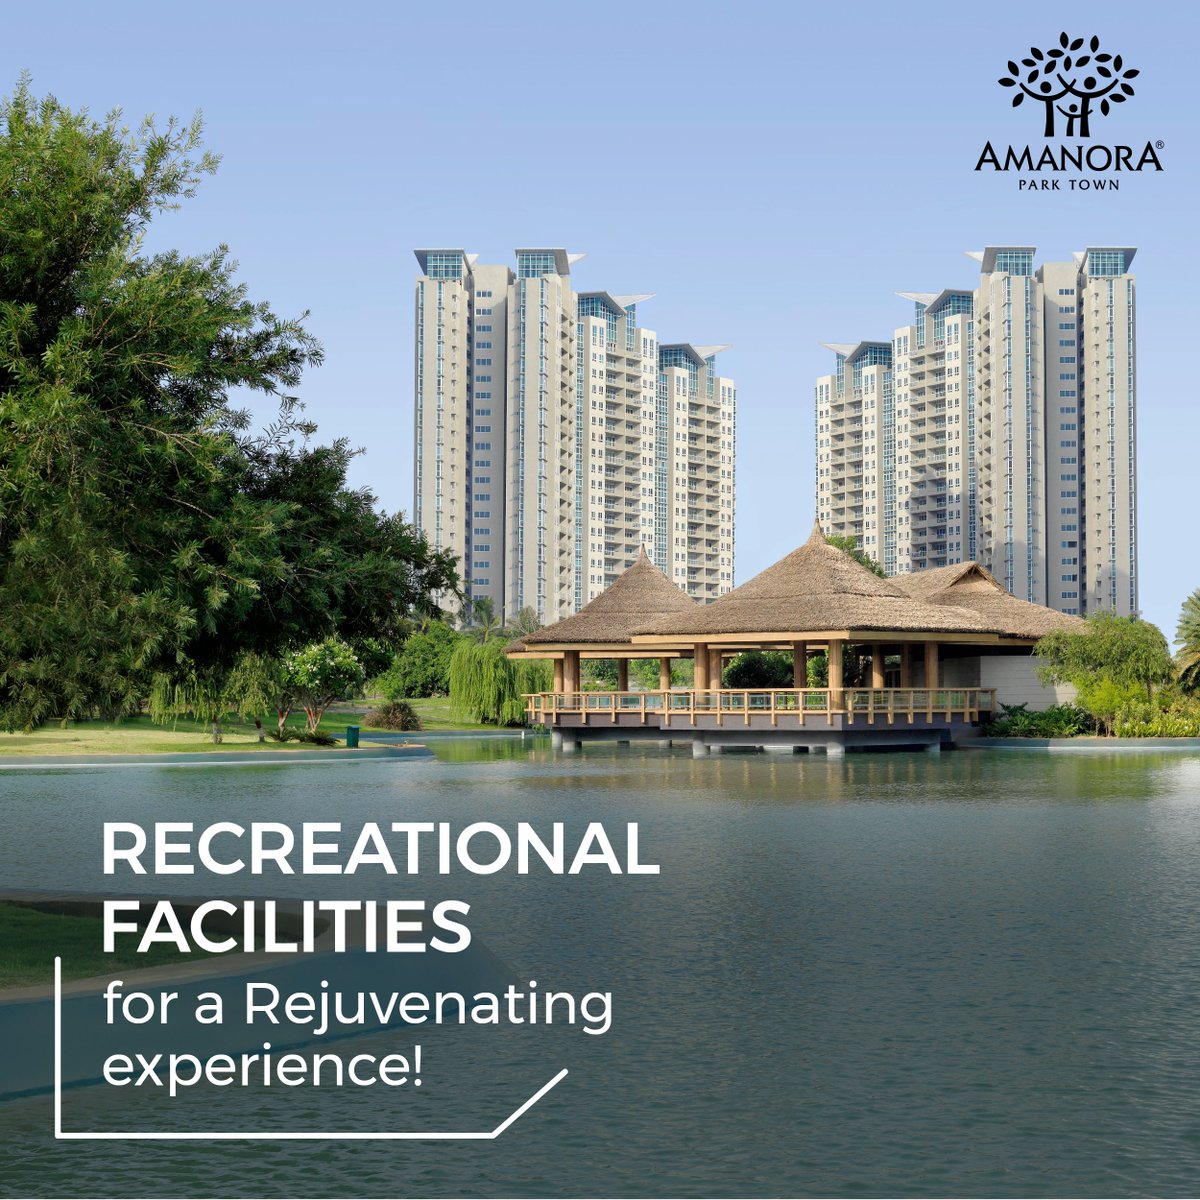 Life at Amanora Park Town is better and merrier! With state-of-the-art amenities and world-class features, lead a happier and healthier lifestyle just here.
To know more visit: amanora.com

#PremierProperties #AmanoraParkTown #Lifestyle #LuxuryLiving #RealEstate #Pune